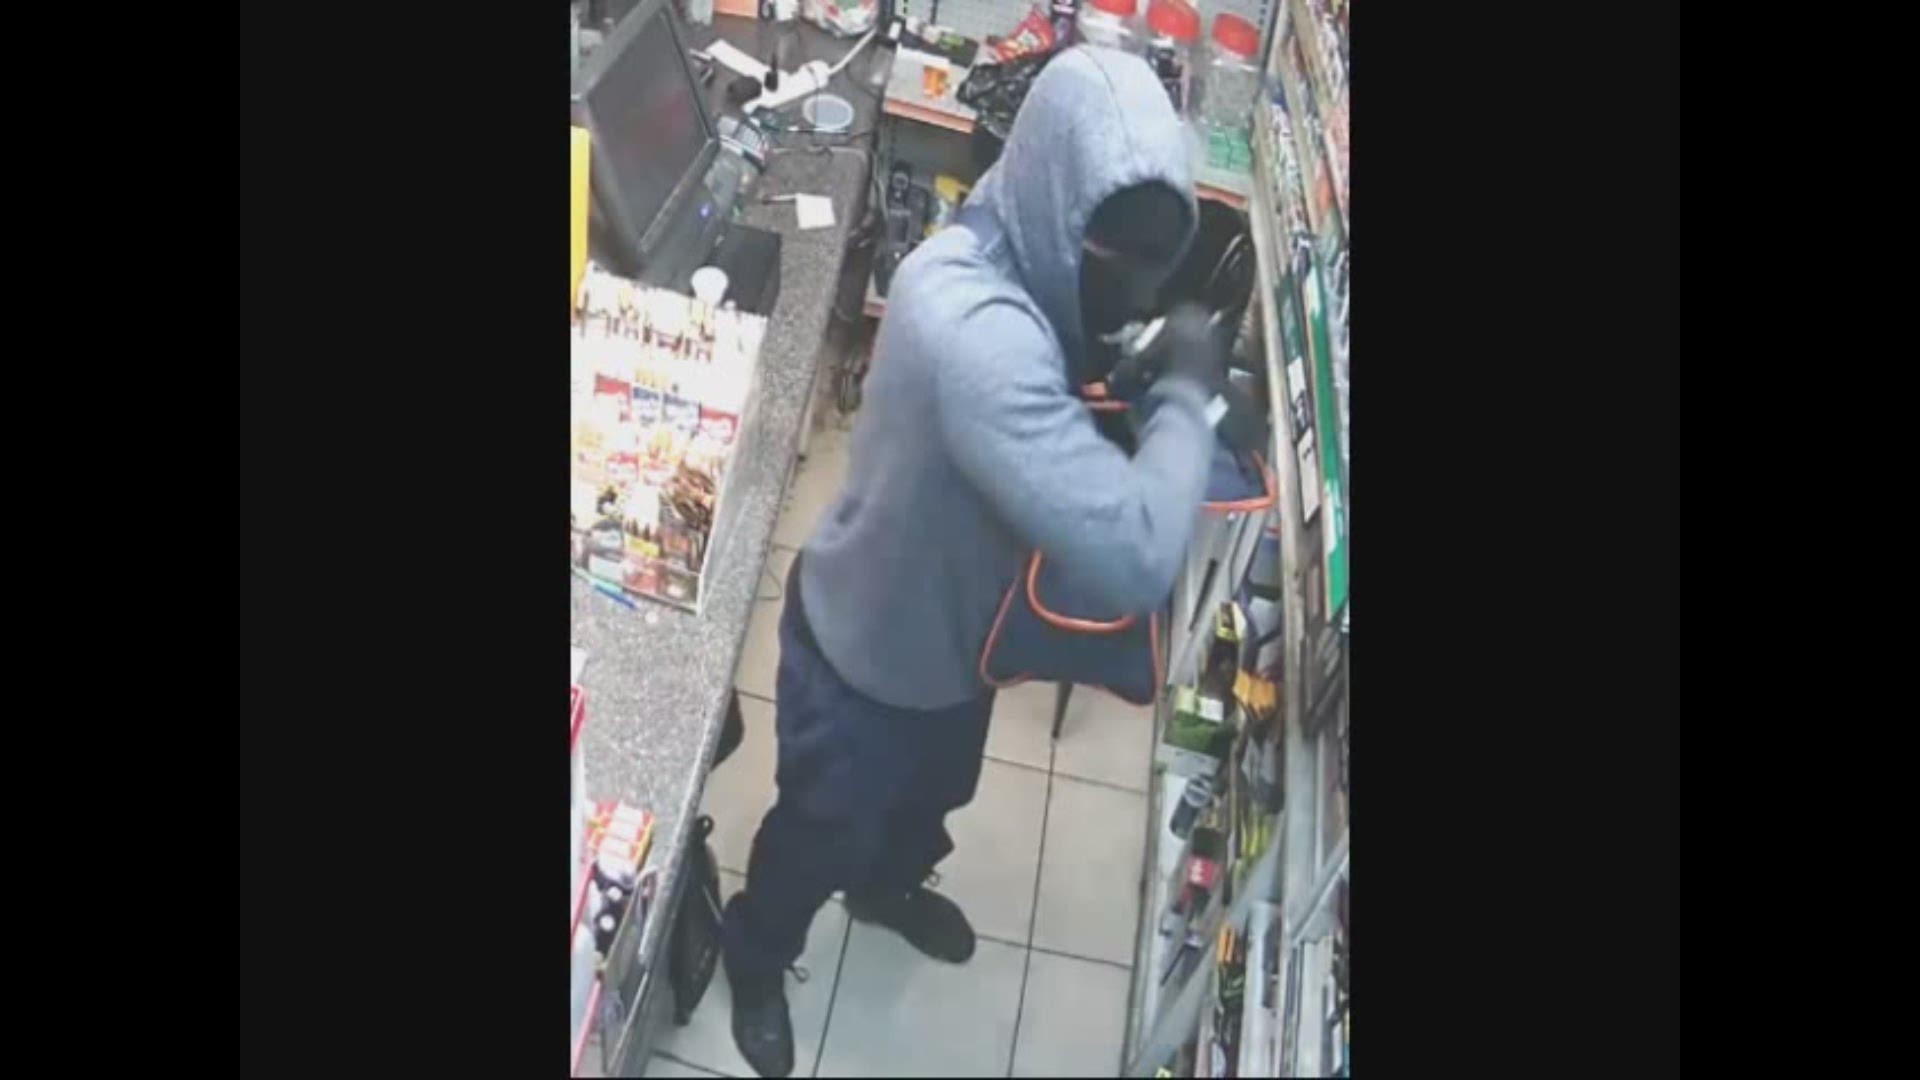 Deputies say the suspect shown in this surveillance video stole more than $4,000 worth of cigarettes.